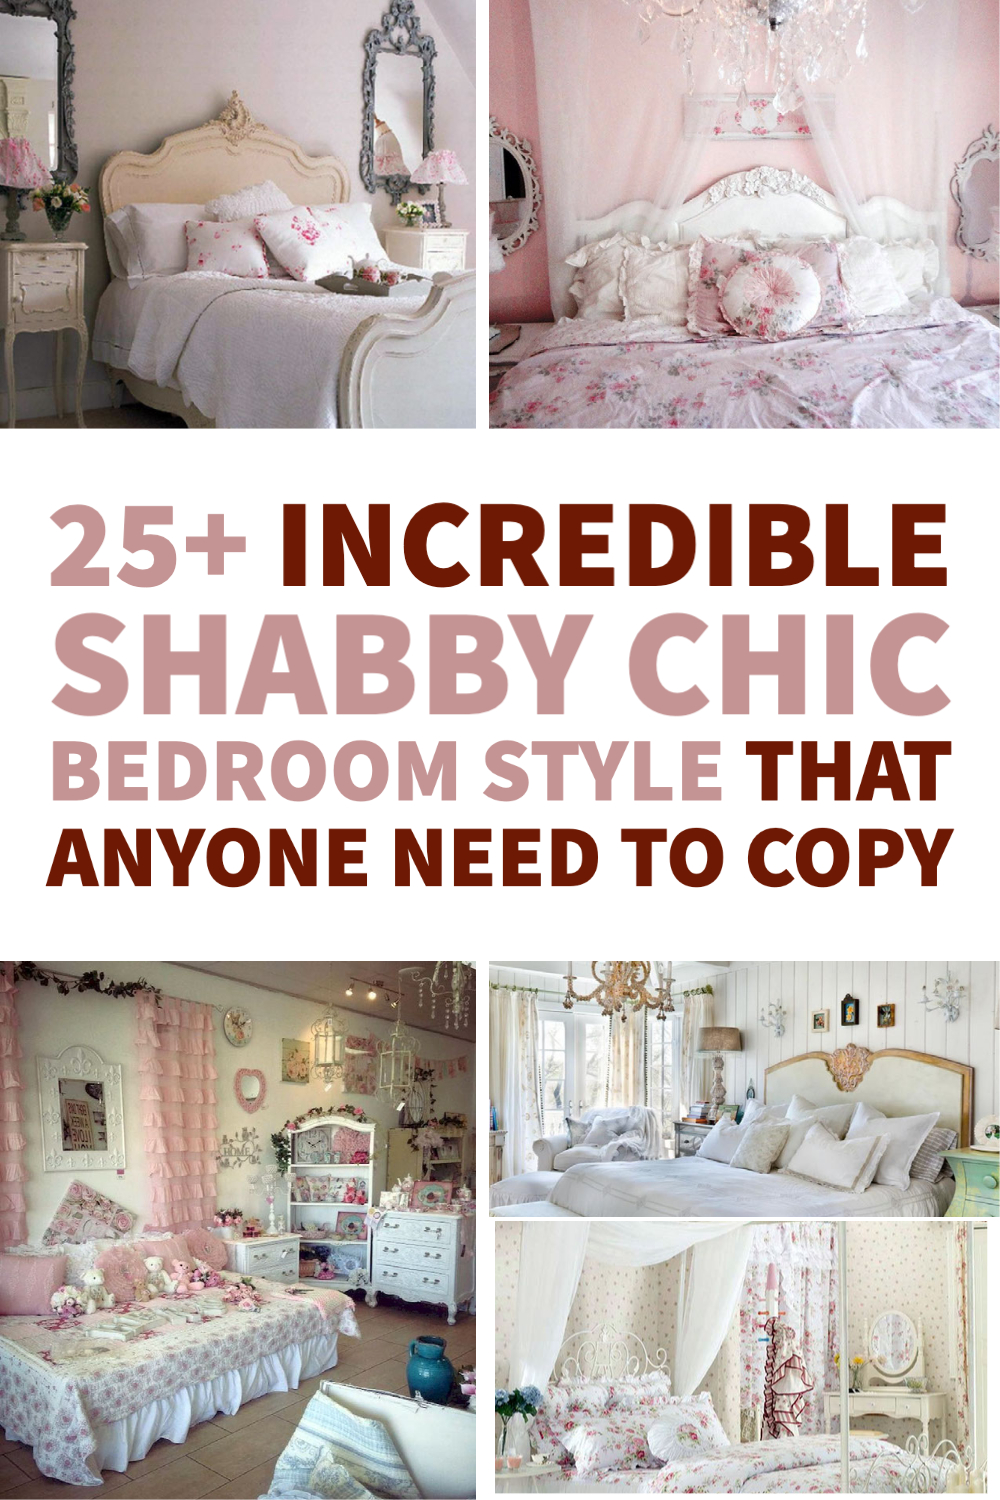 25 Incredible Shabby Chic Bedroom Style That Anyone Need To Copy